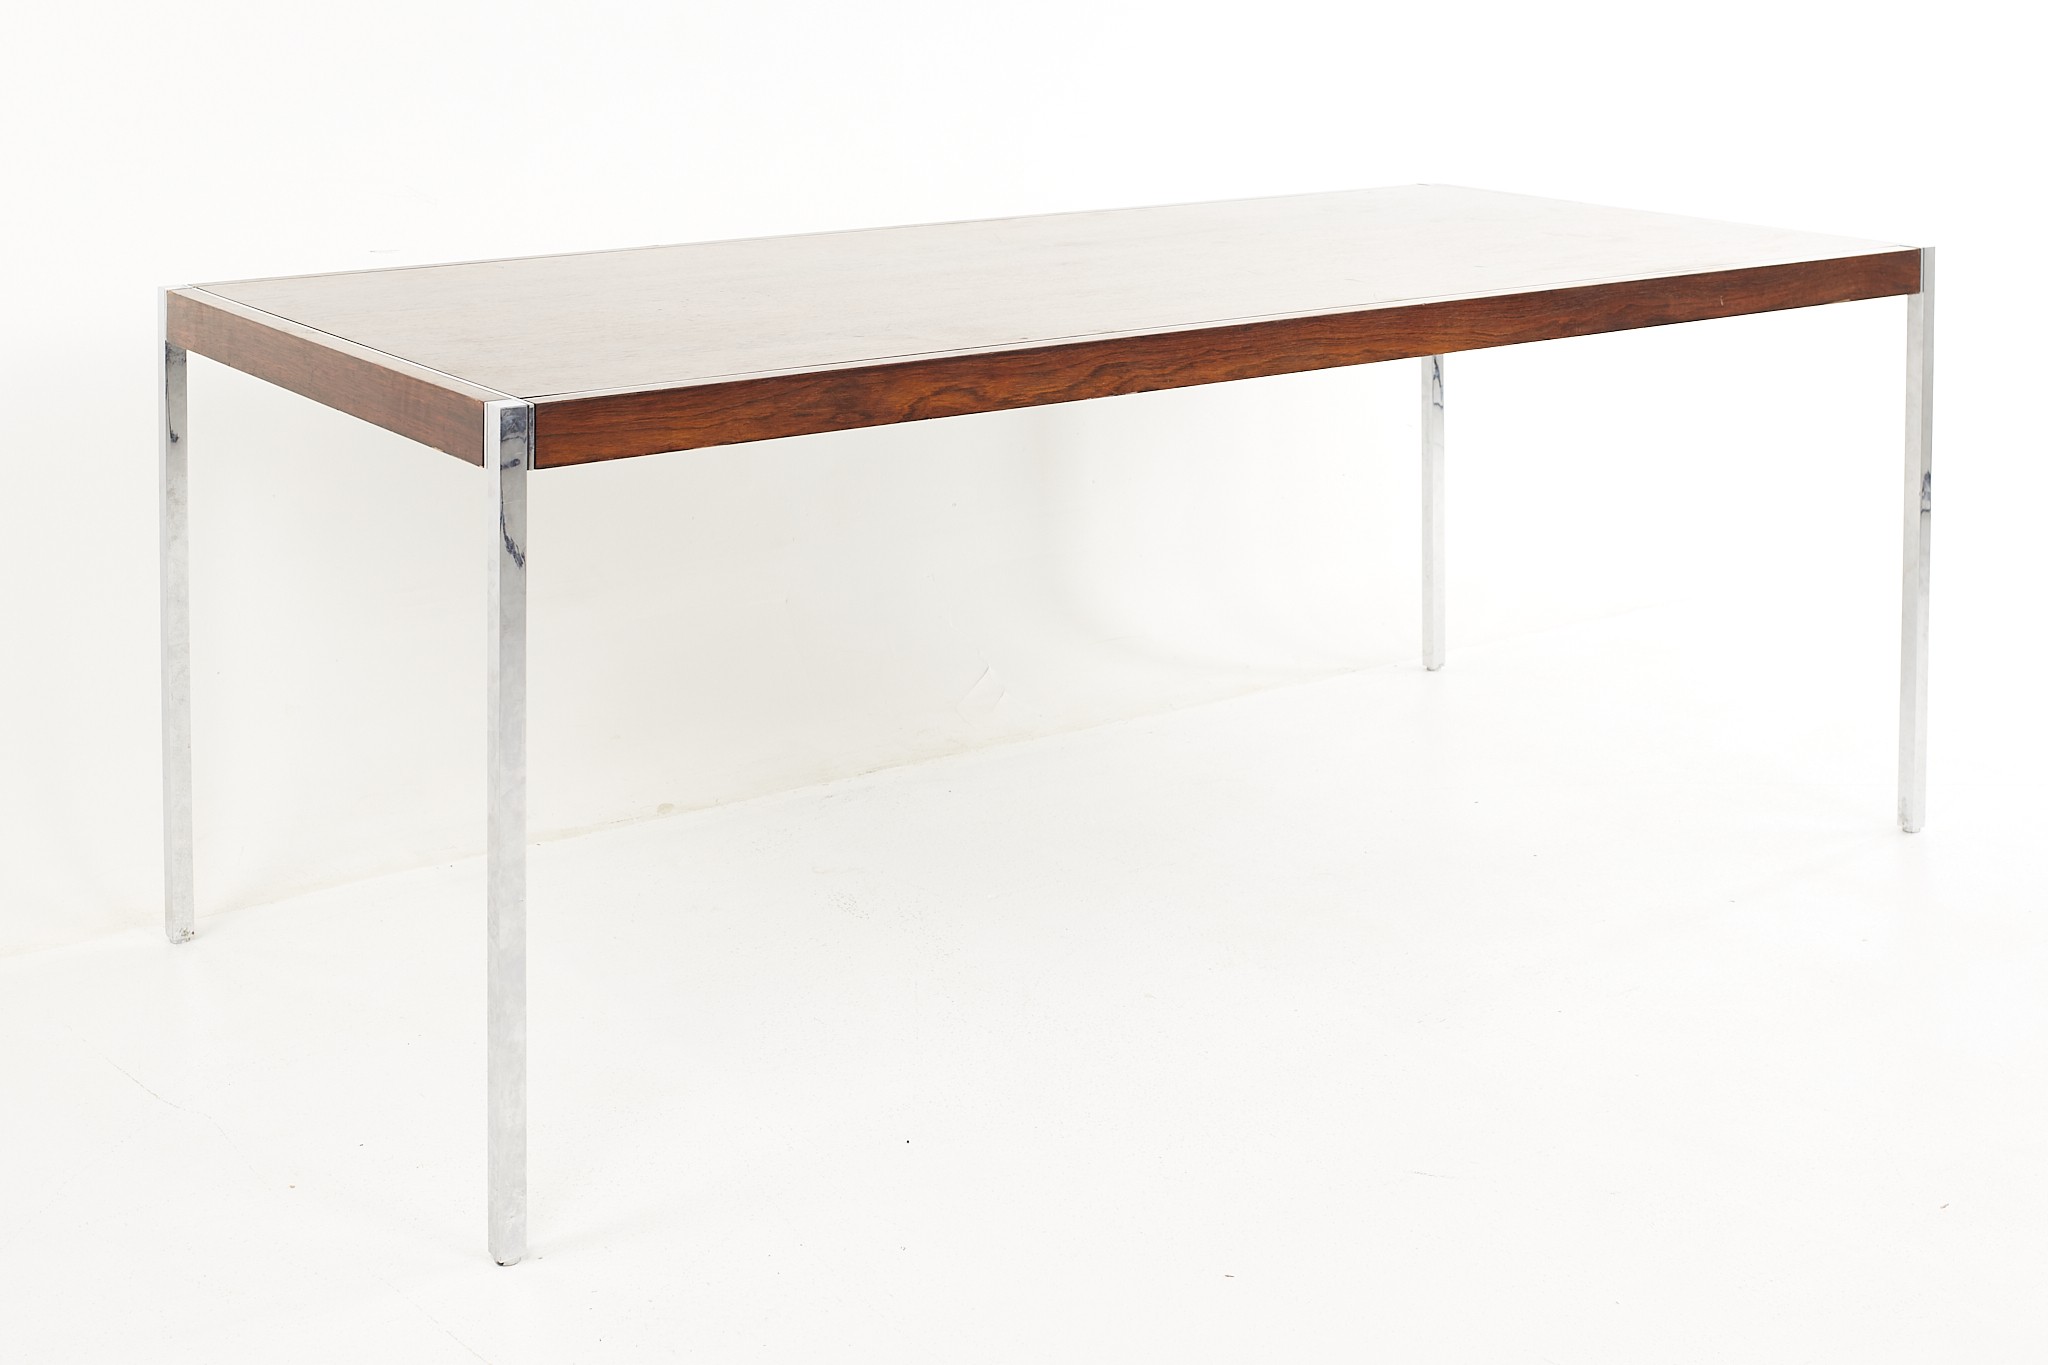 Richard Schultz for Knoll Mid Century Rosewood and Chrome Dining Table